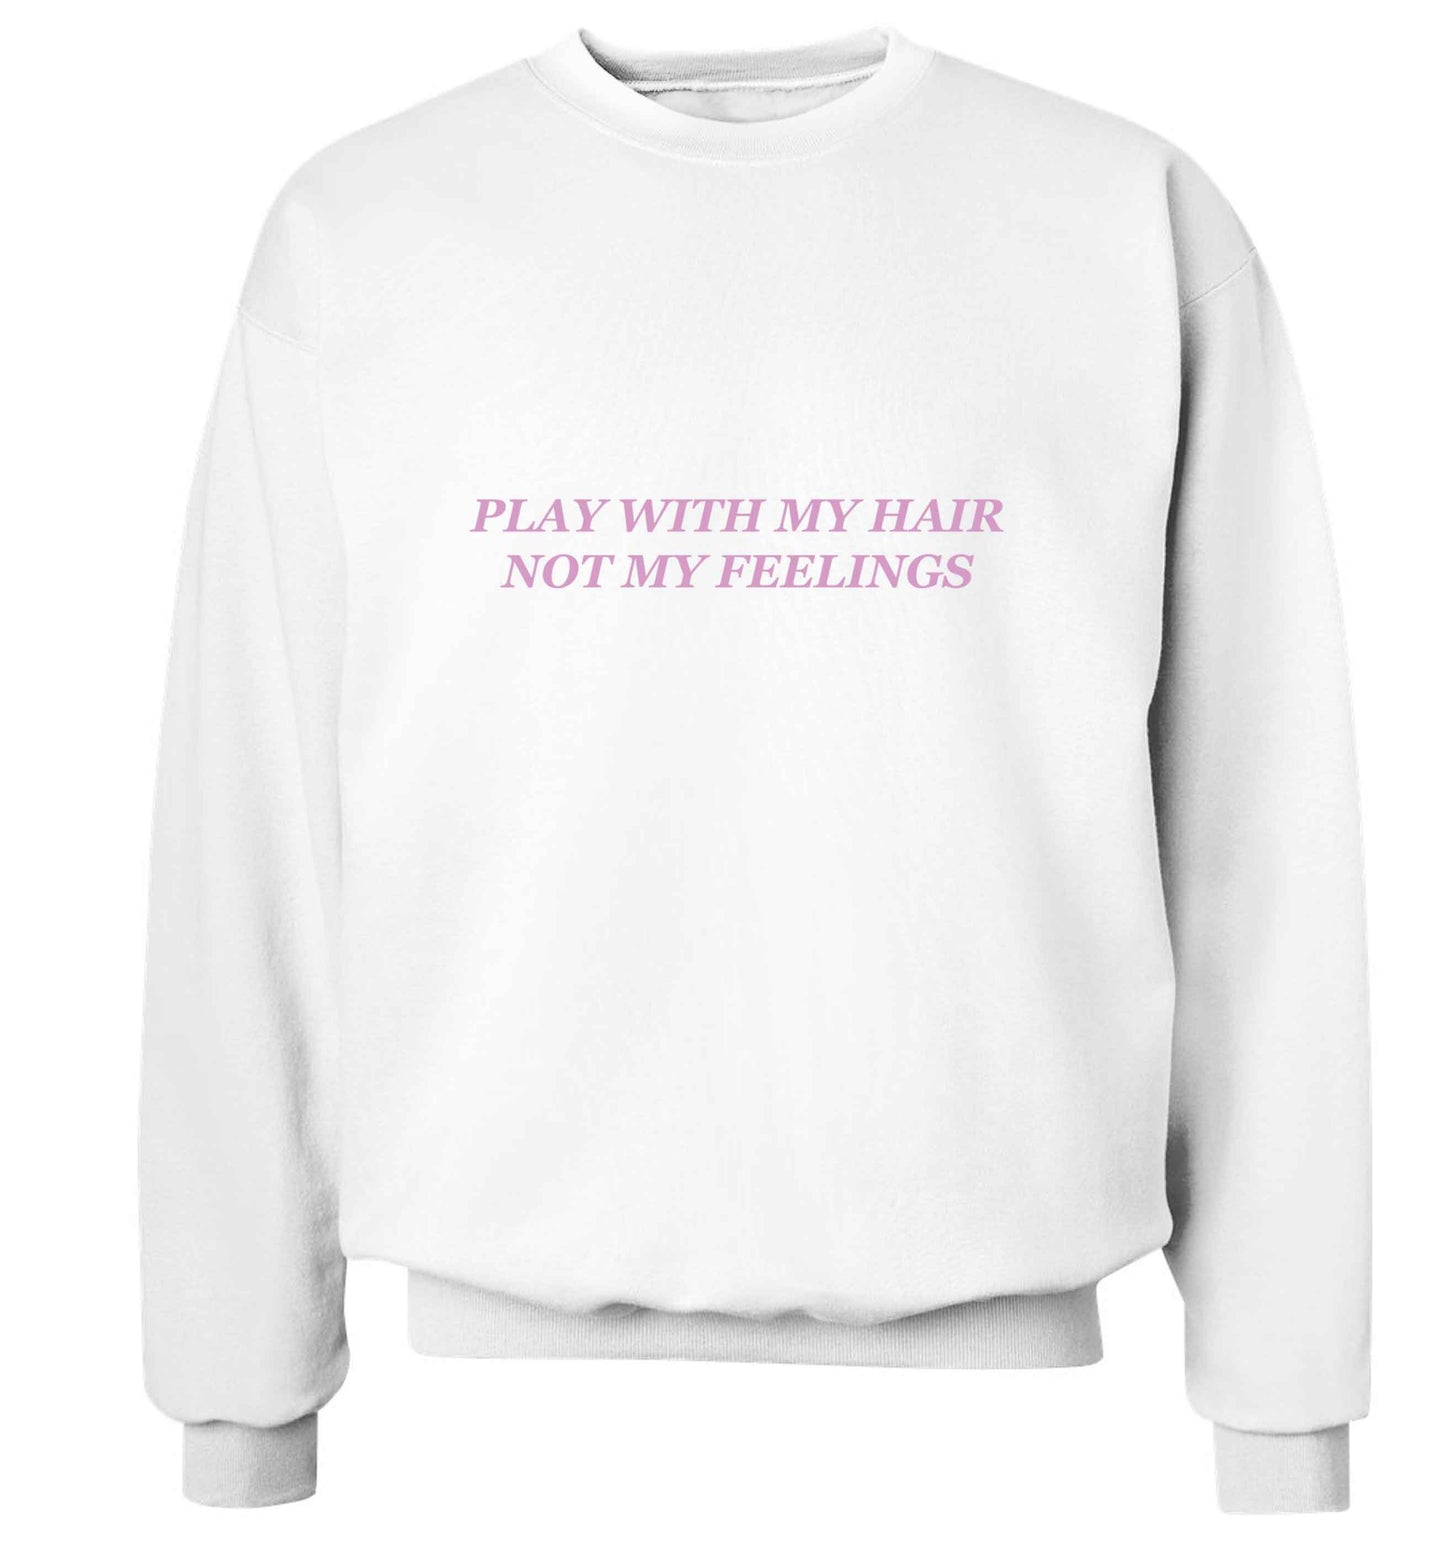 Play with my hair not my feelings adult's unisex white sweater 2XL